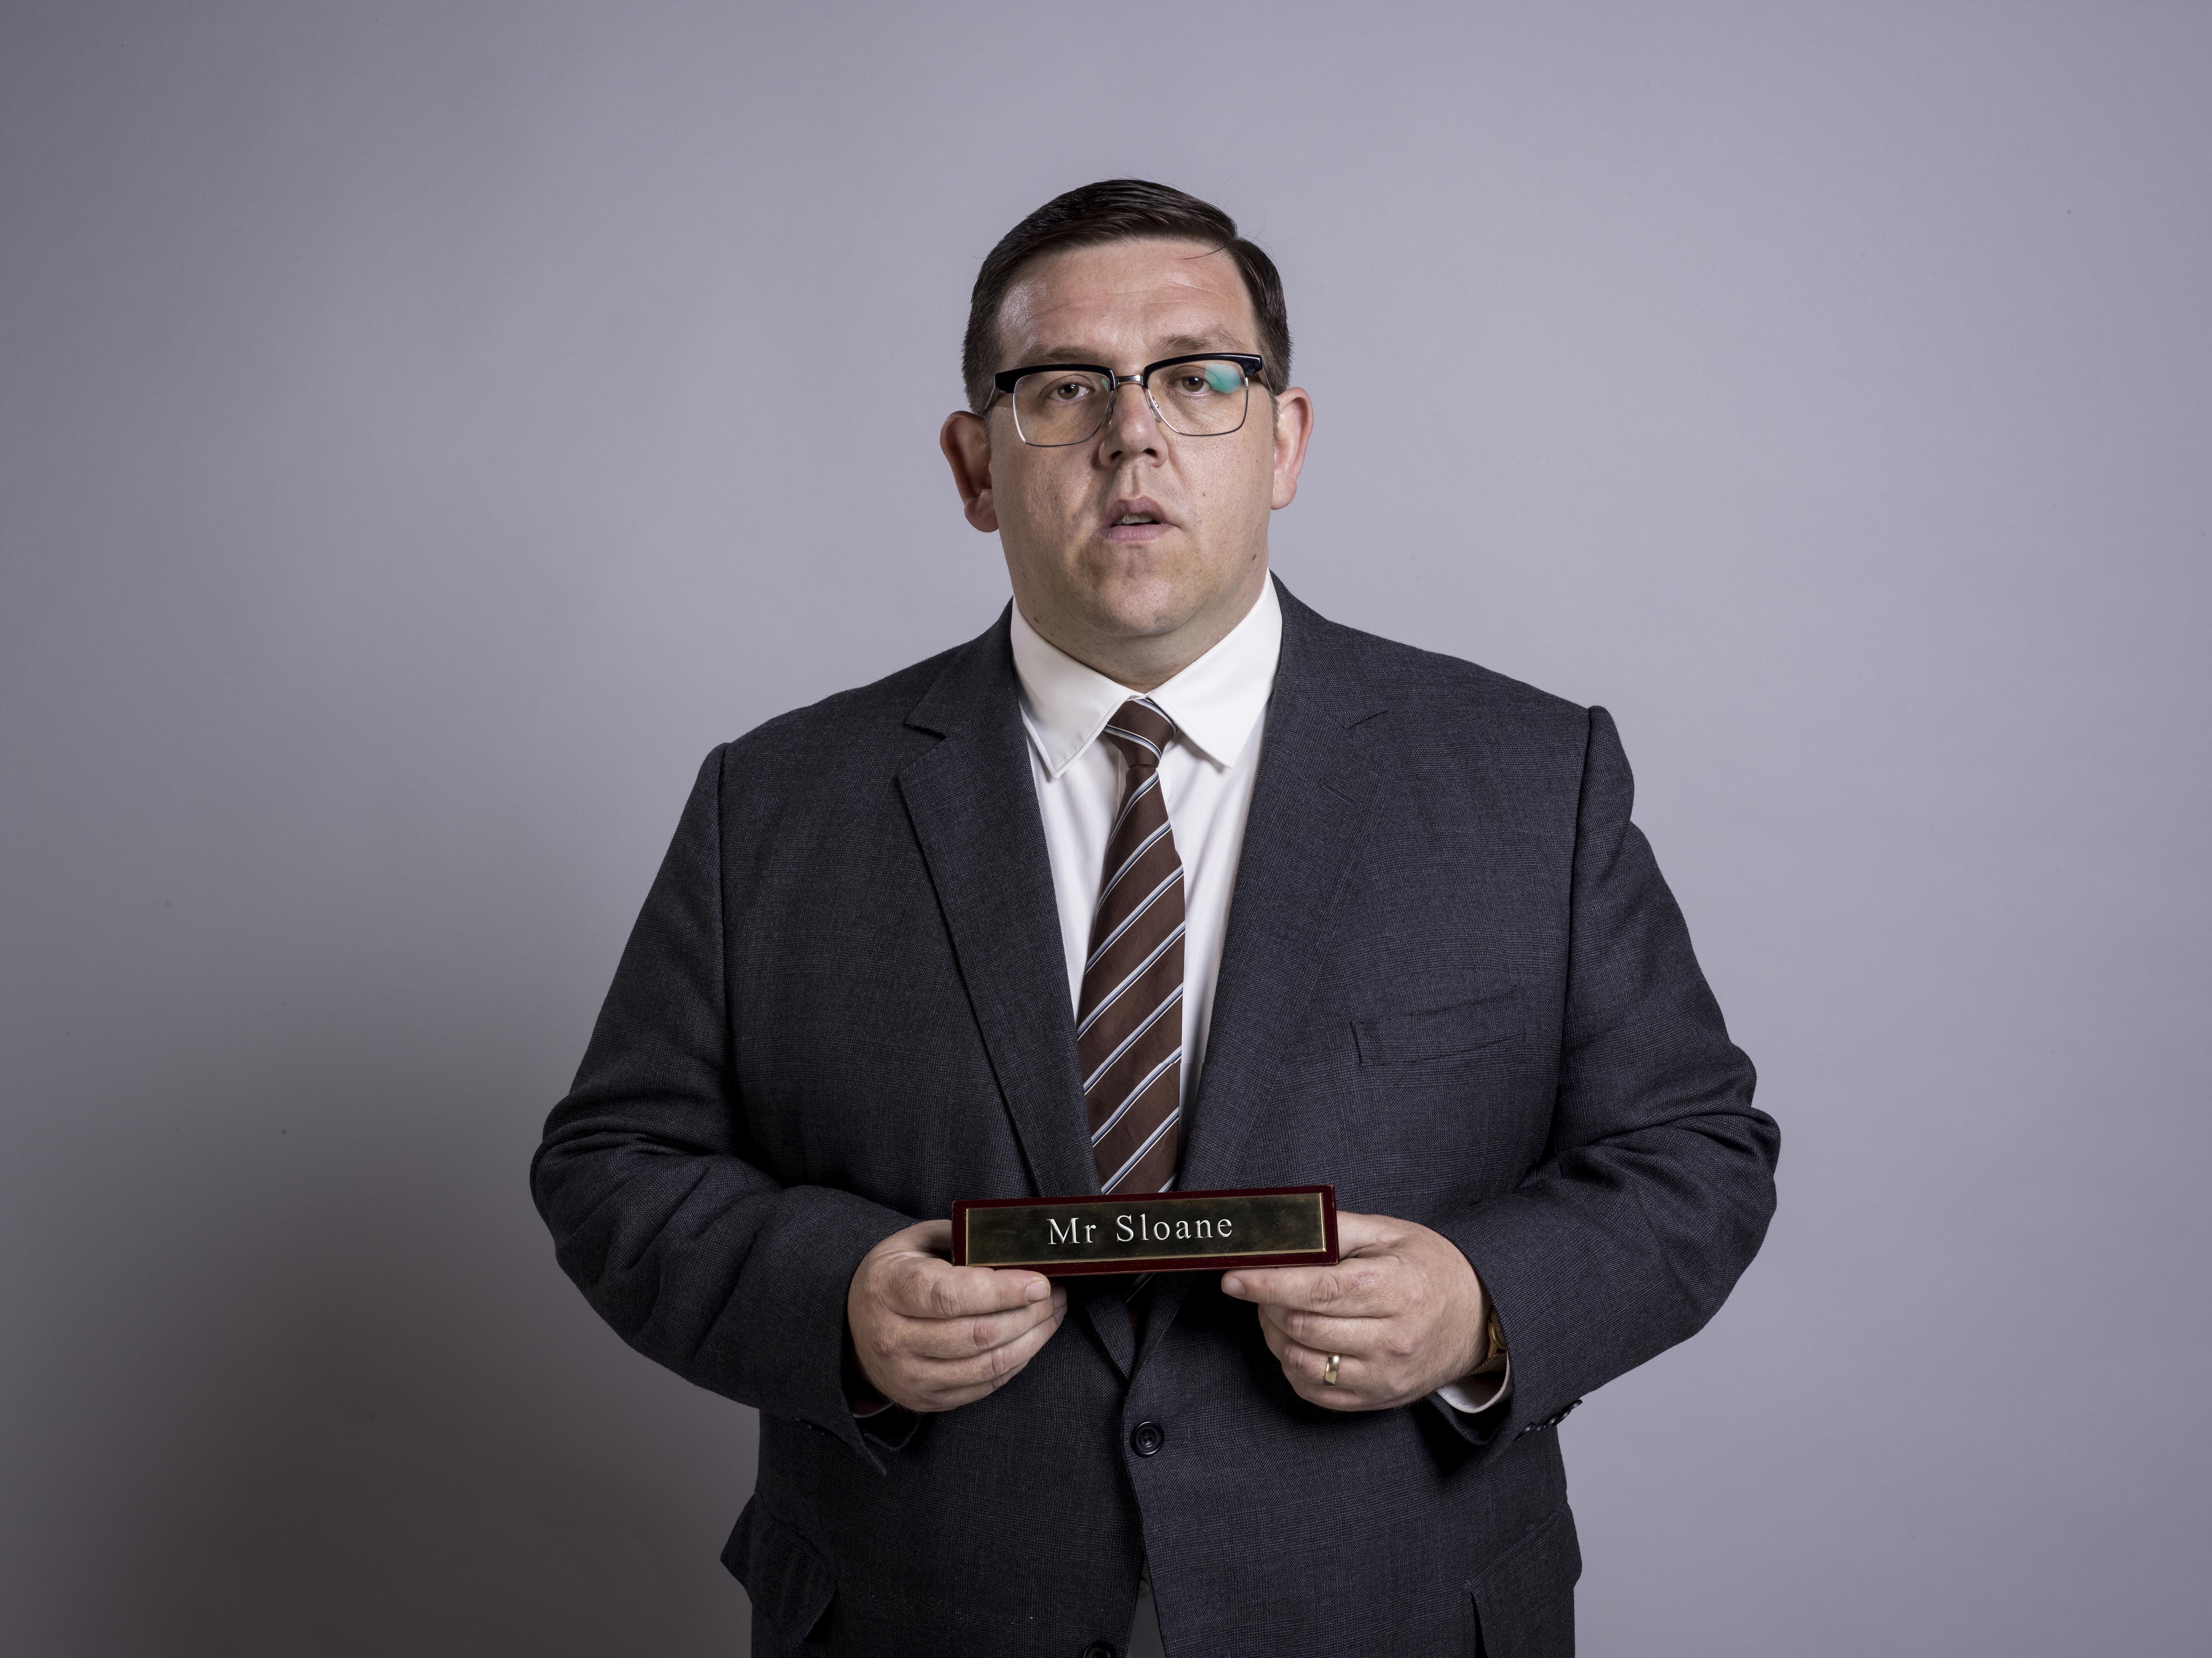 Nick Frost Wallpaper Image Photo Picture Background